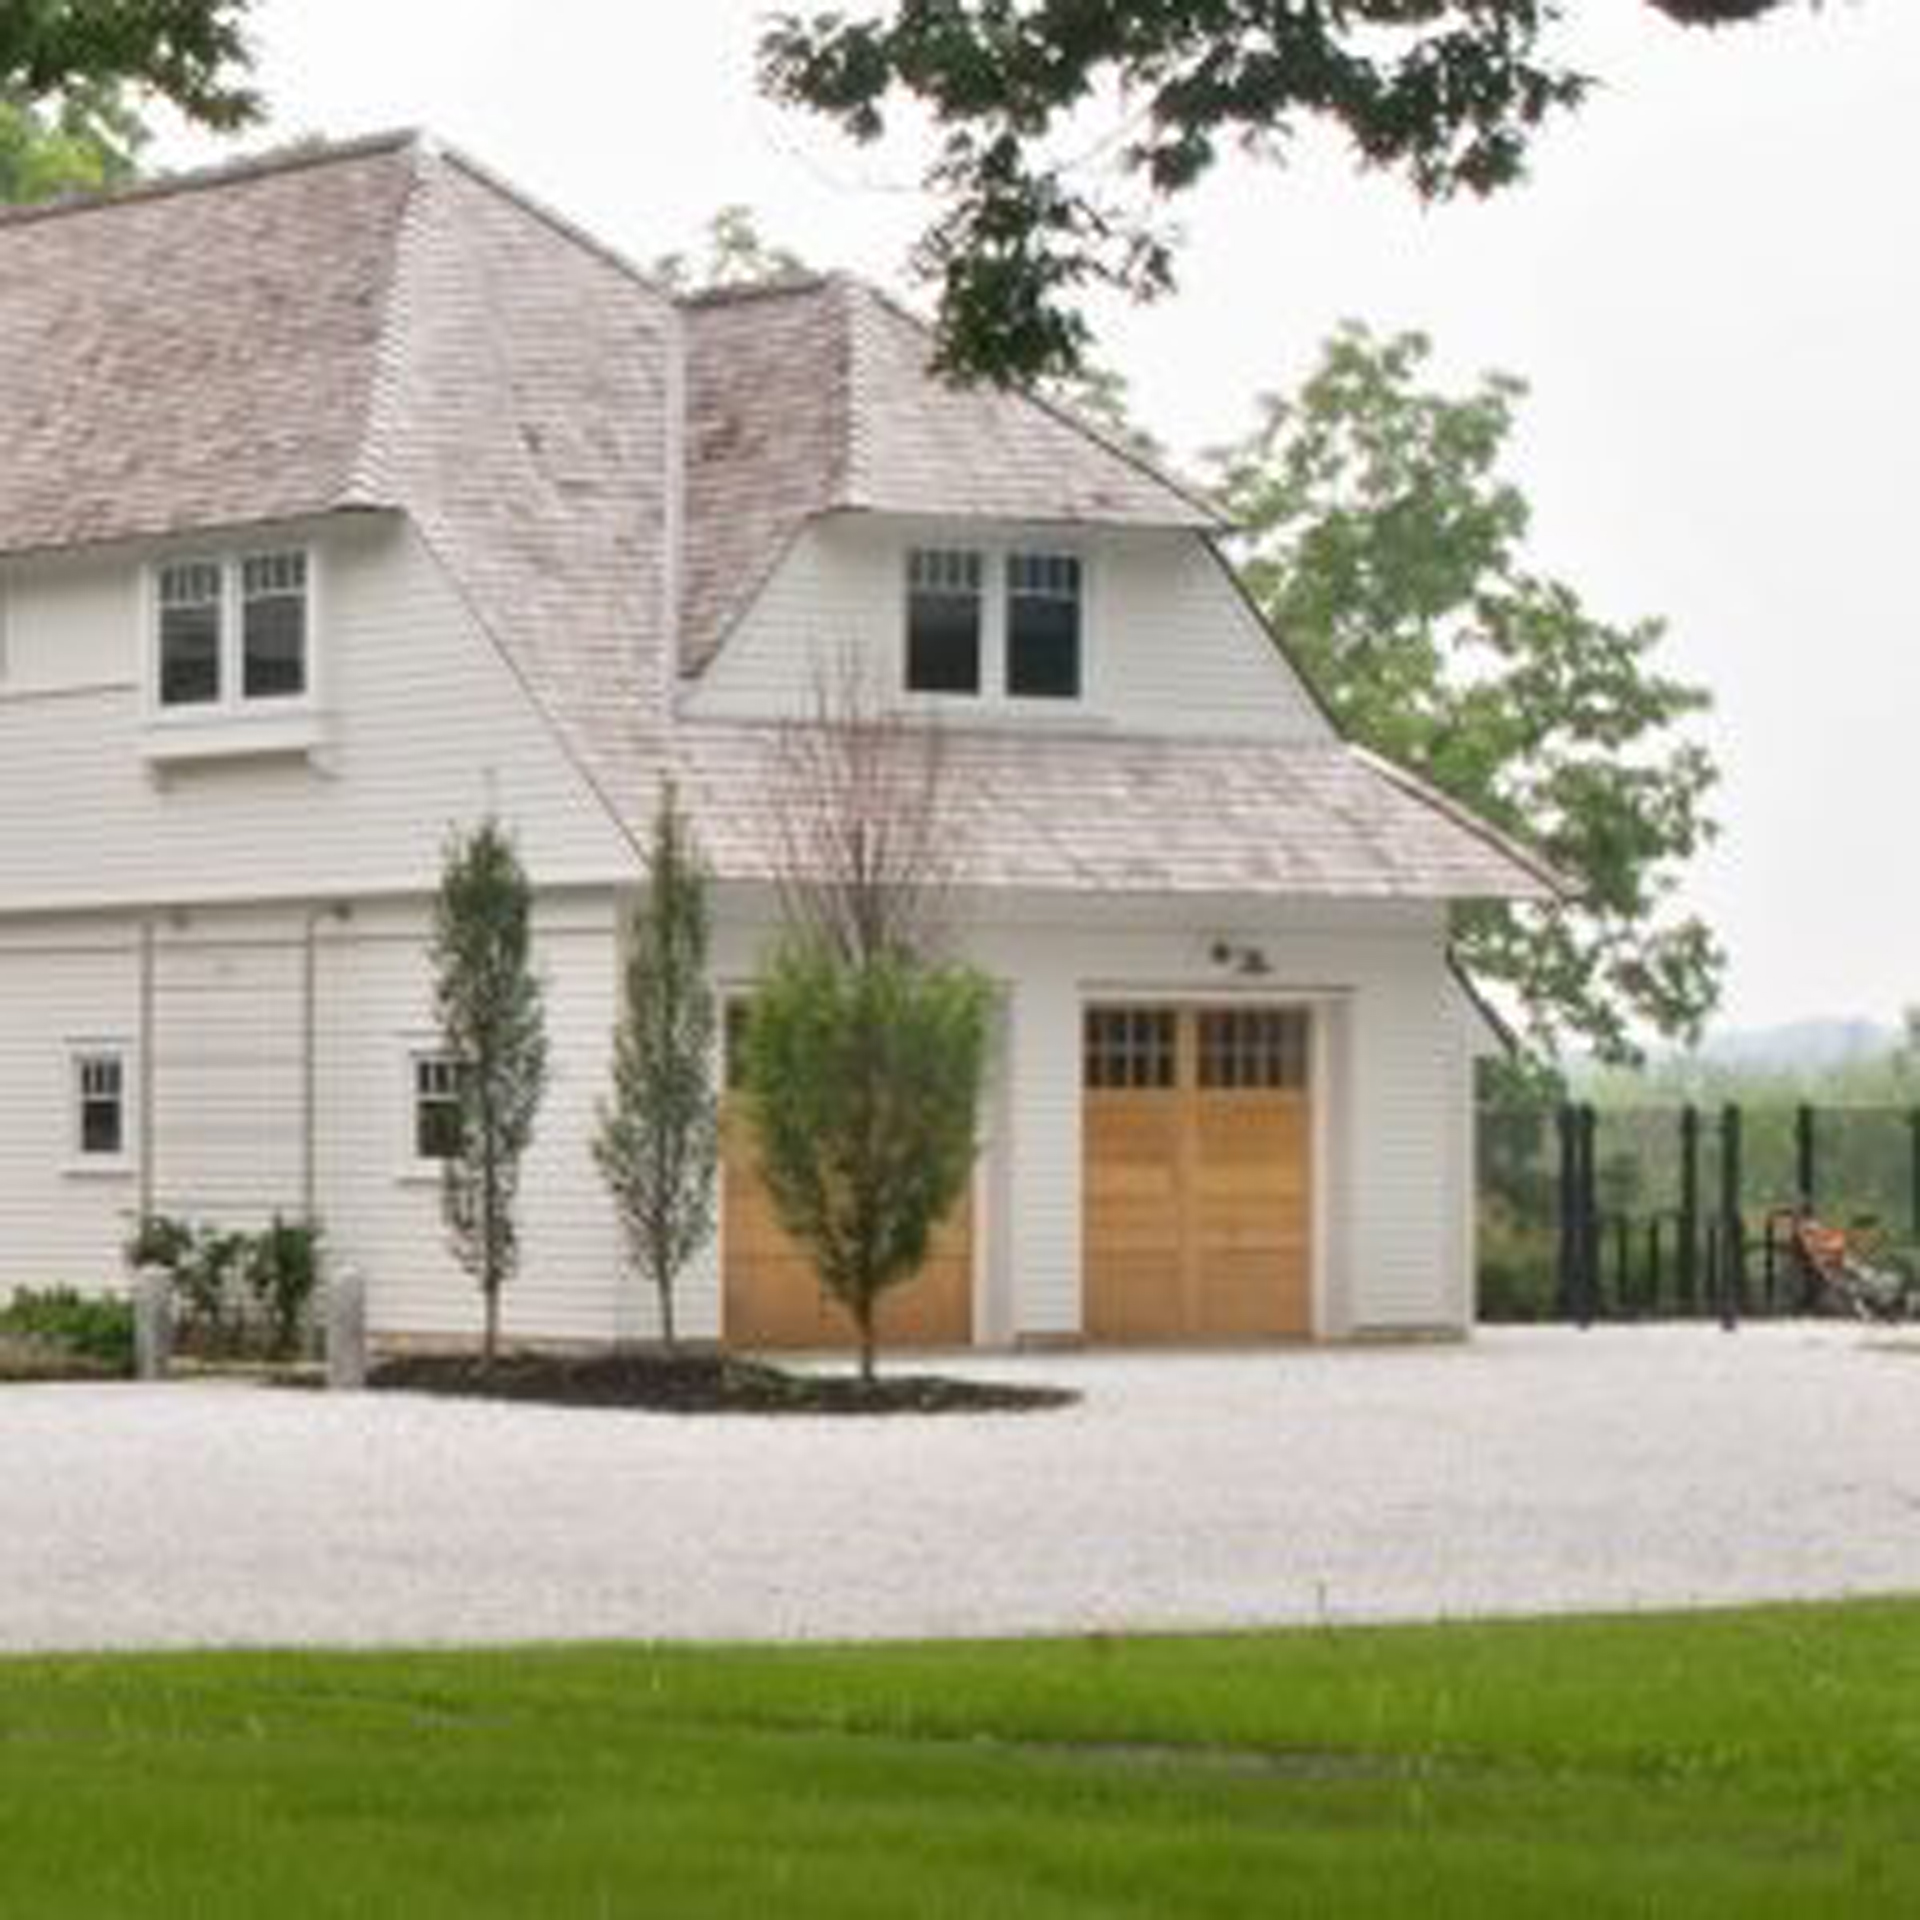 A transitional style home designed by Nautilus Architects in Upstate New York with a two-car wood panel garage